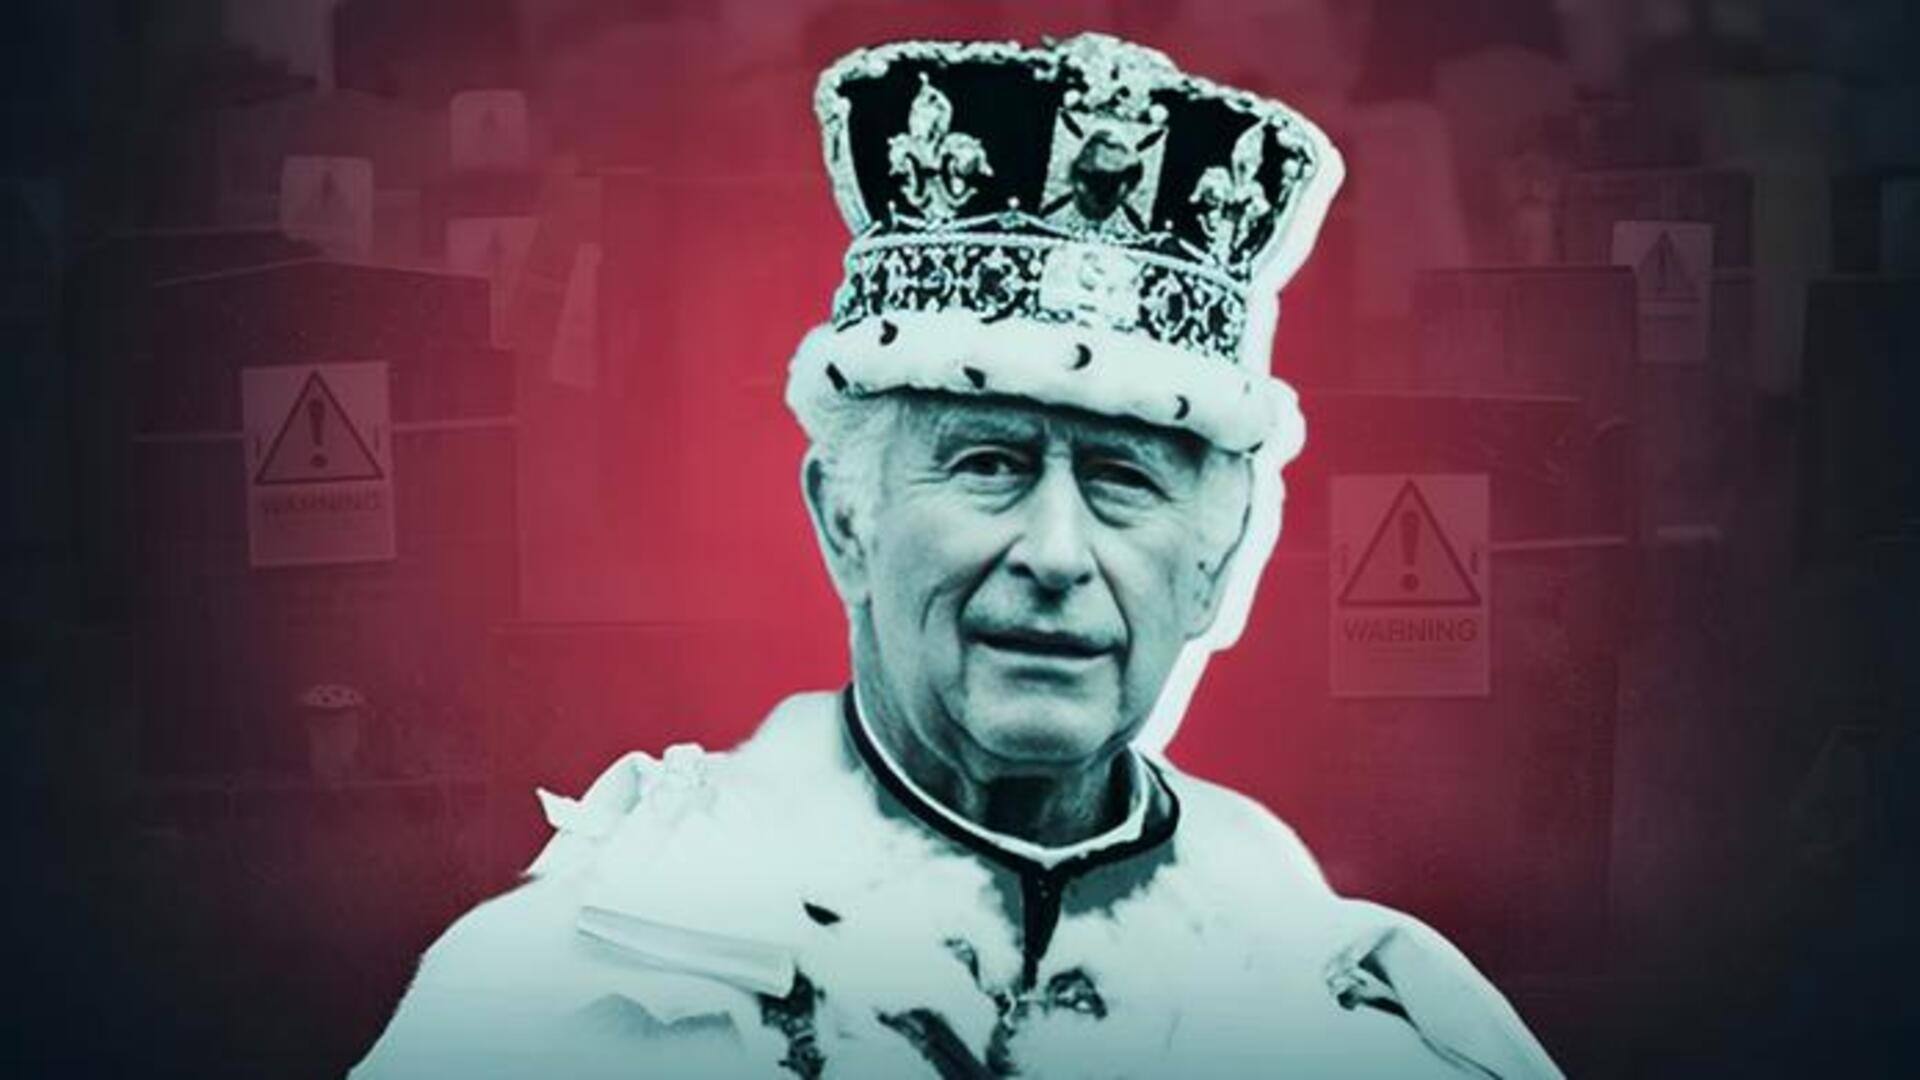 UK's King Charles allegedly benefiting from dead people. Here's how